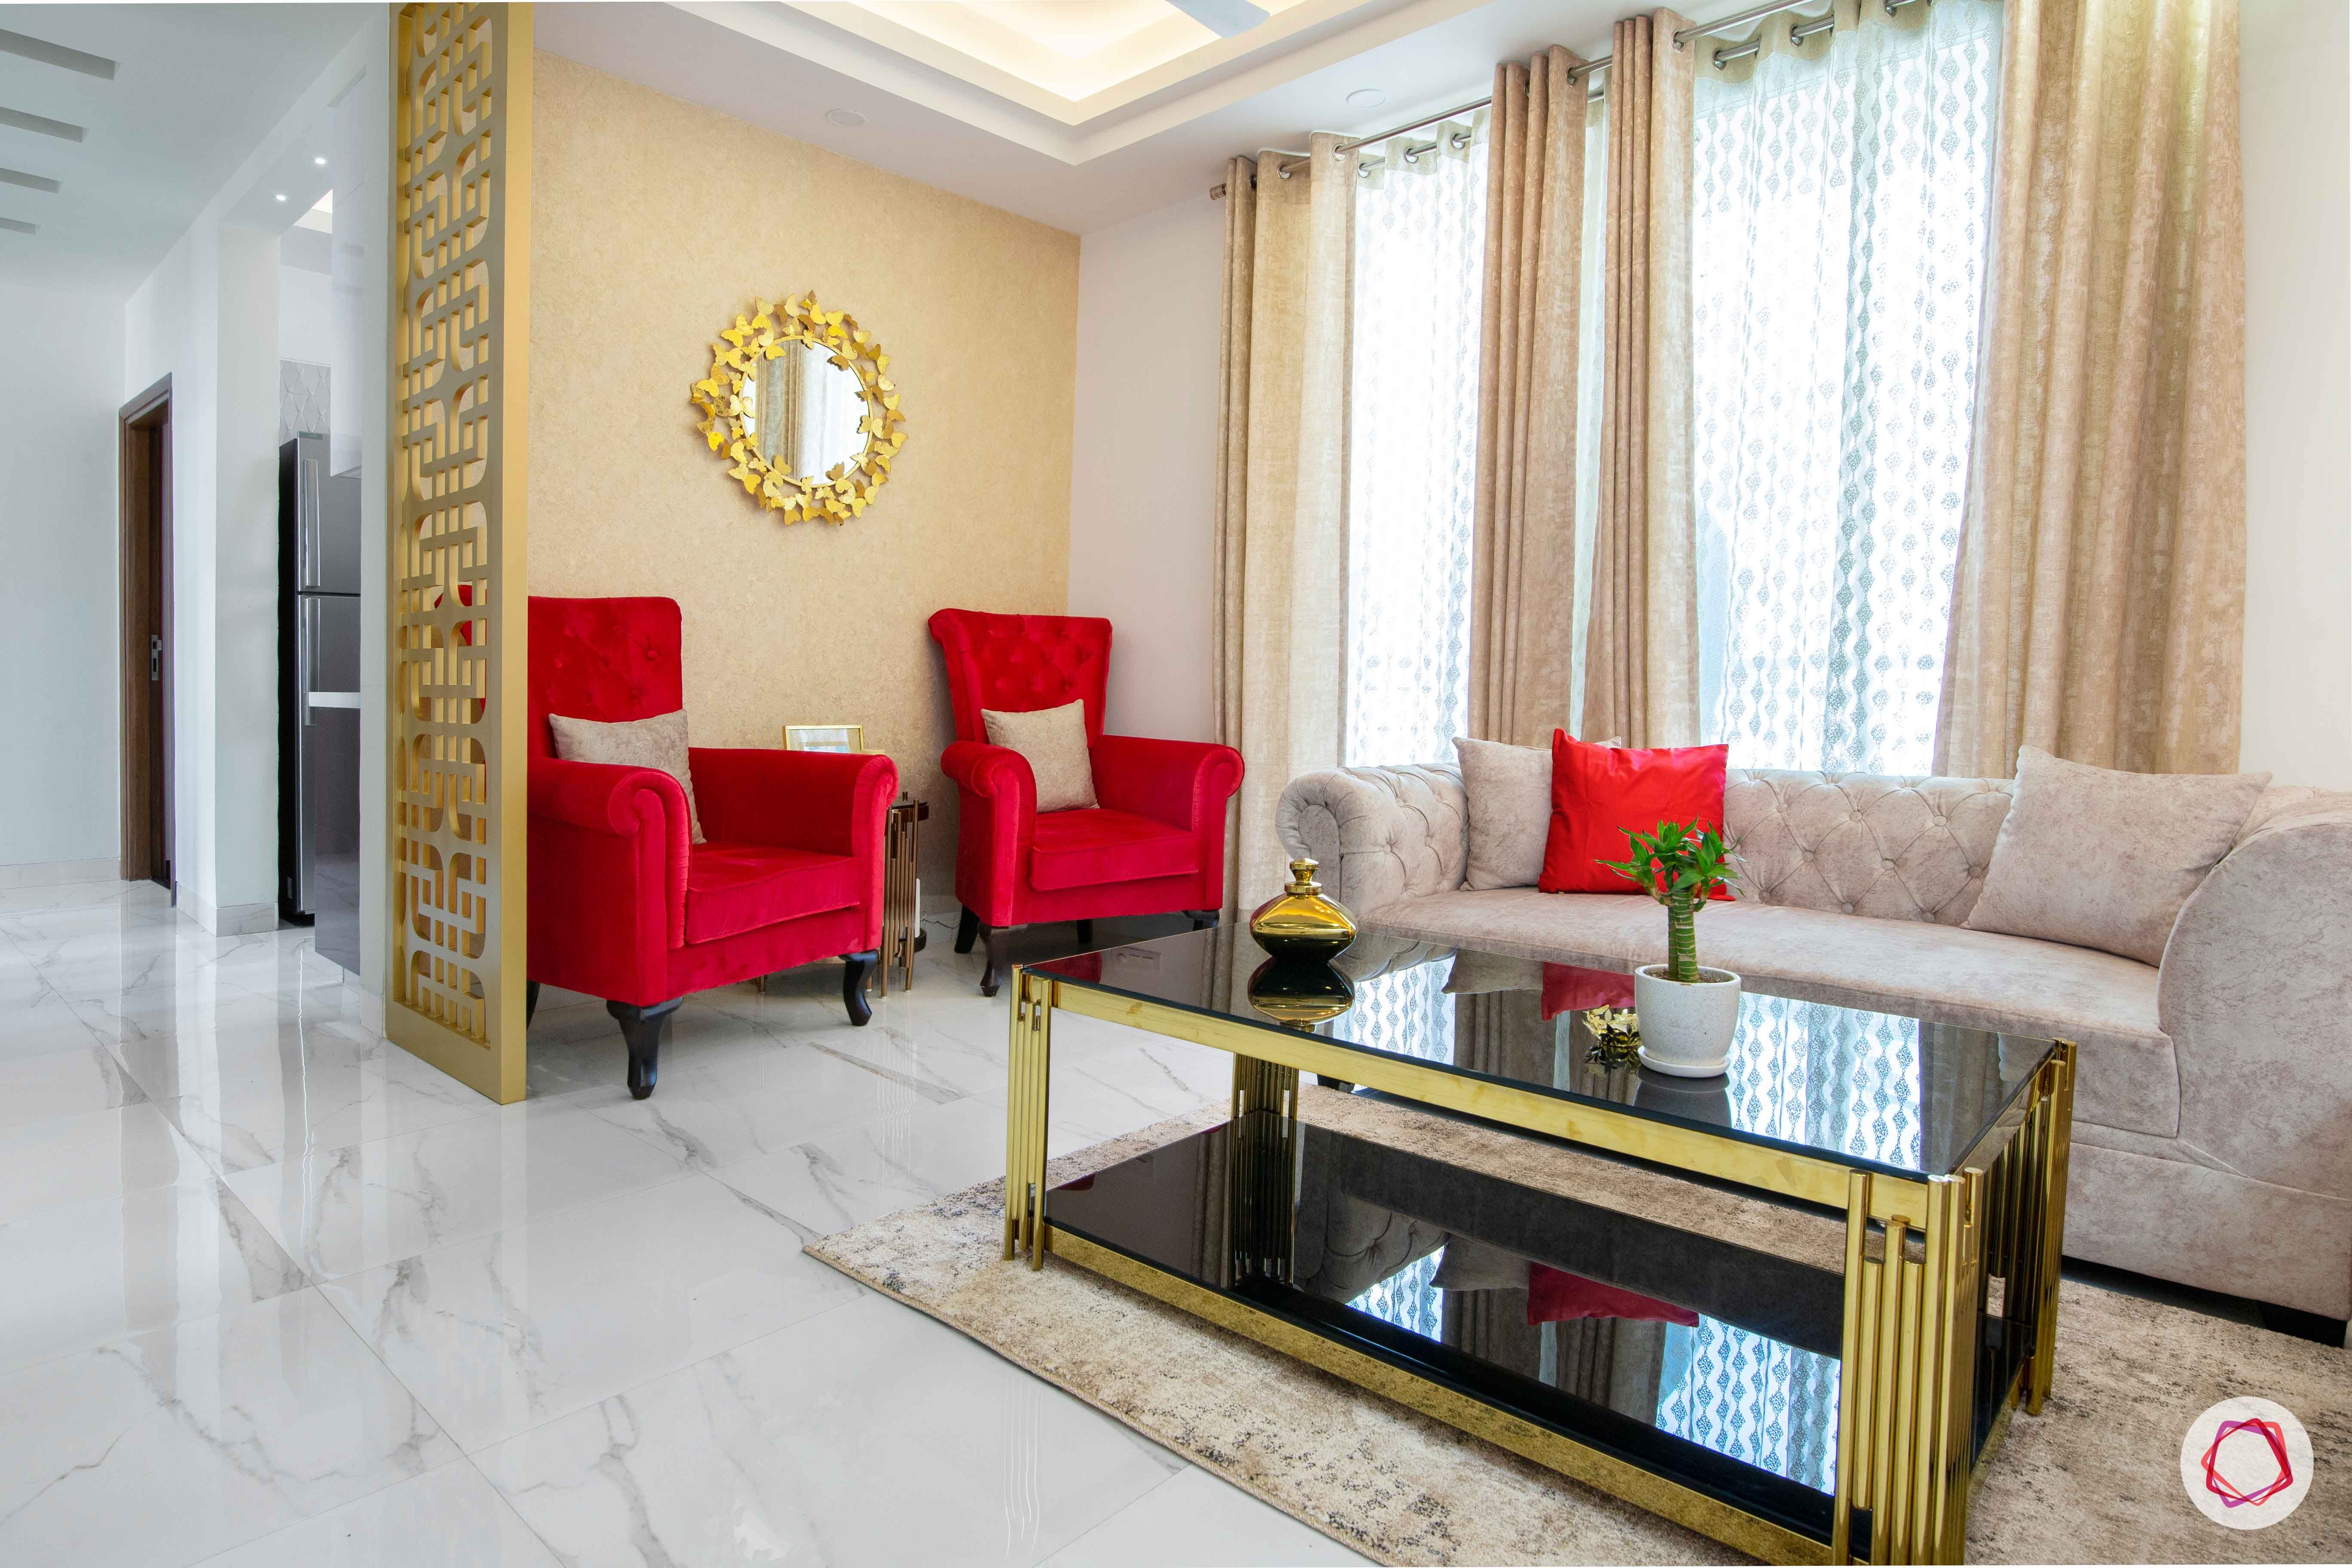 tdi ourania_living room_red accent chairs_golden mirror_golden wallpaper